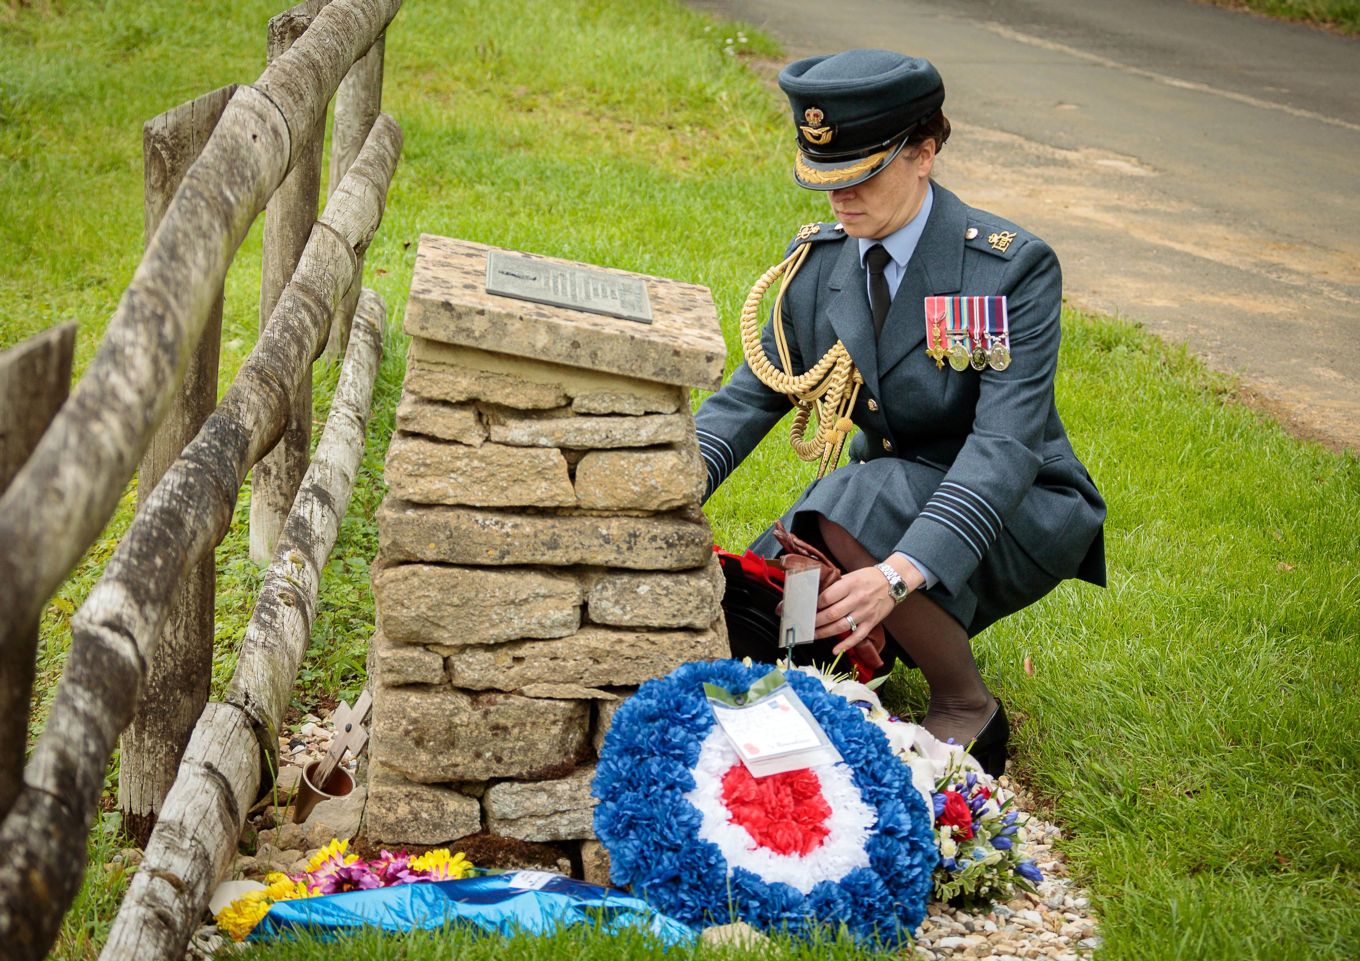 Group Captain Emily Flynn lays a wreath at the memorial cairn, in commemoration of the Albemarle crew